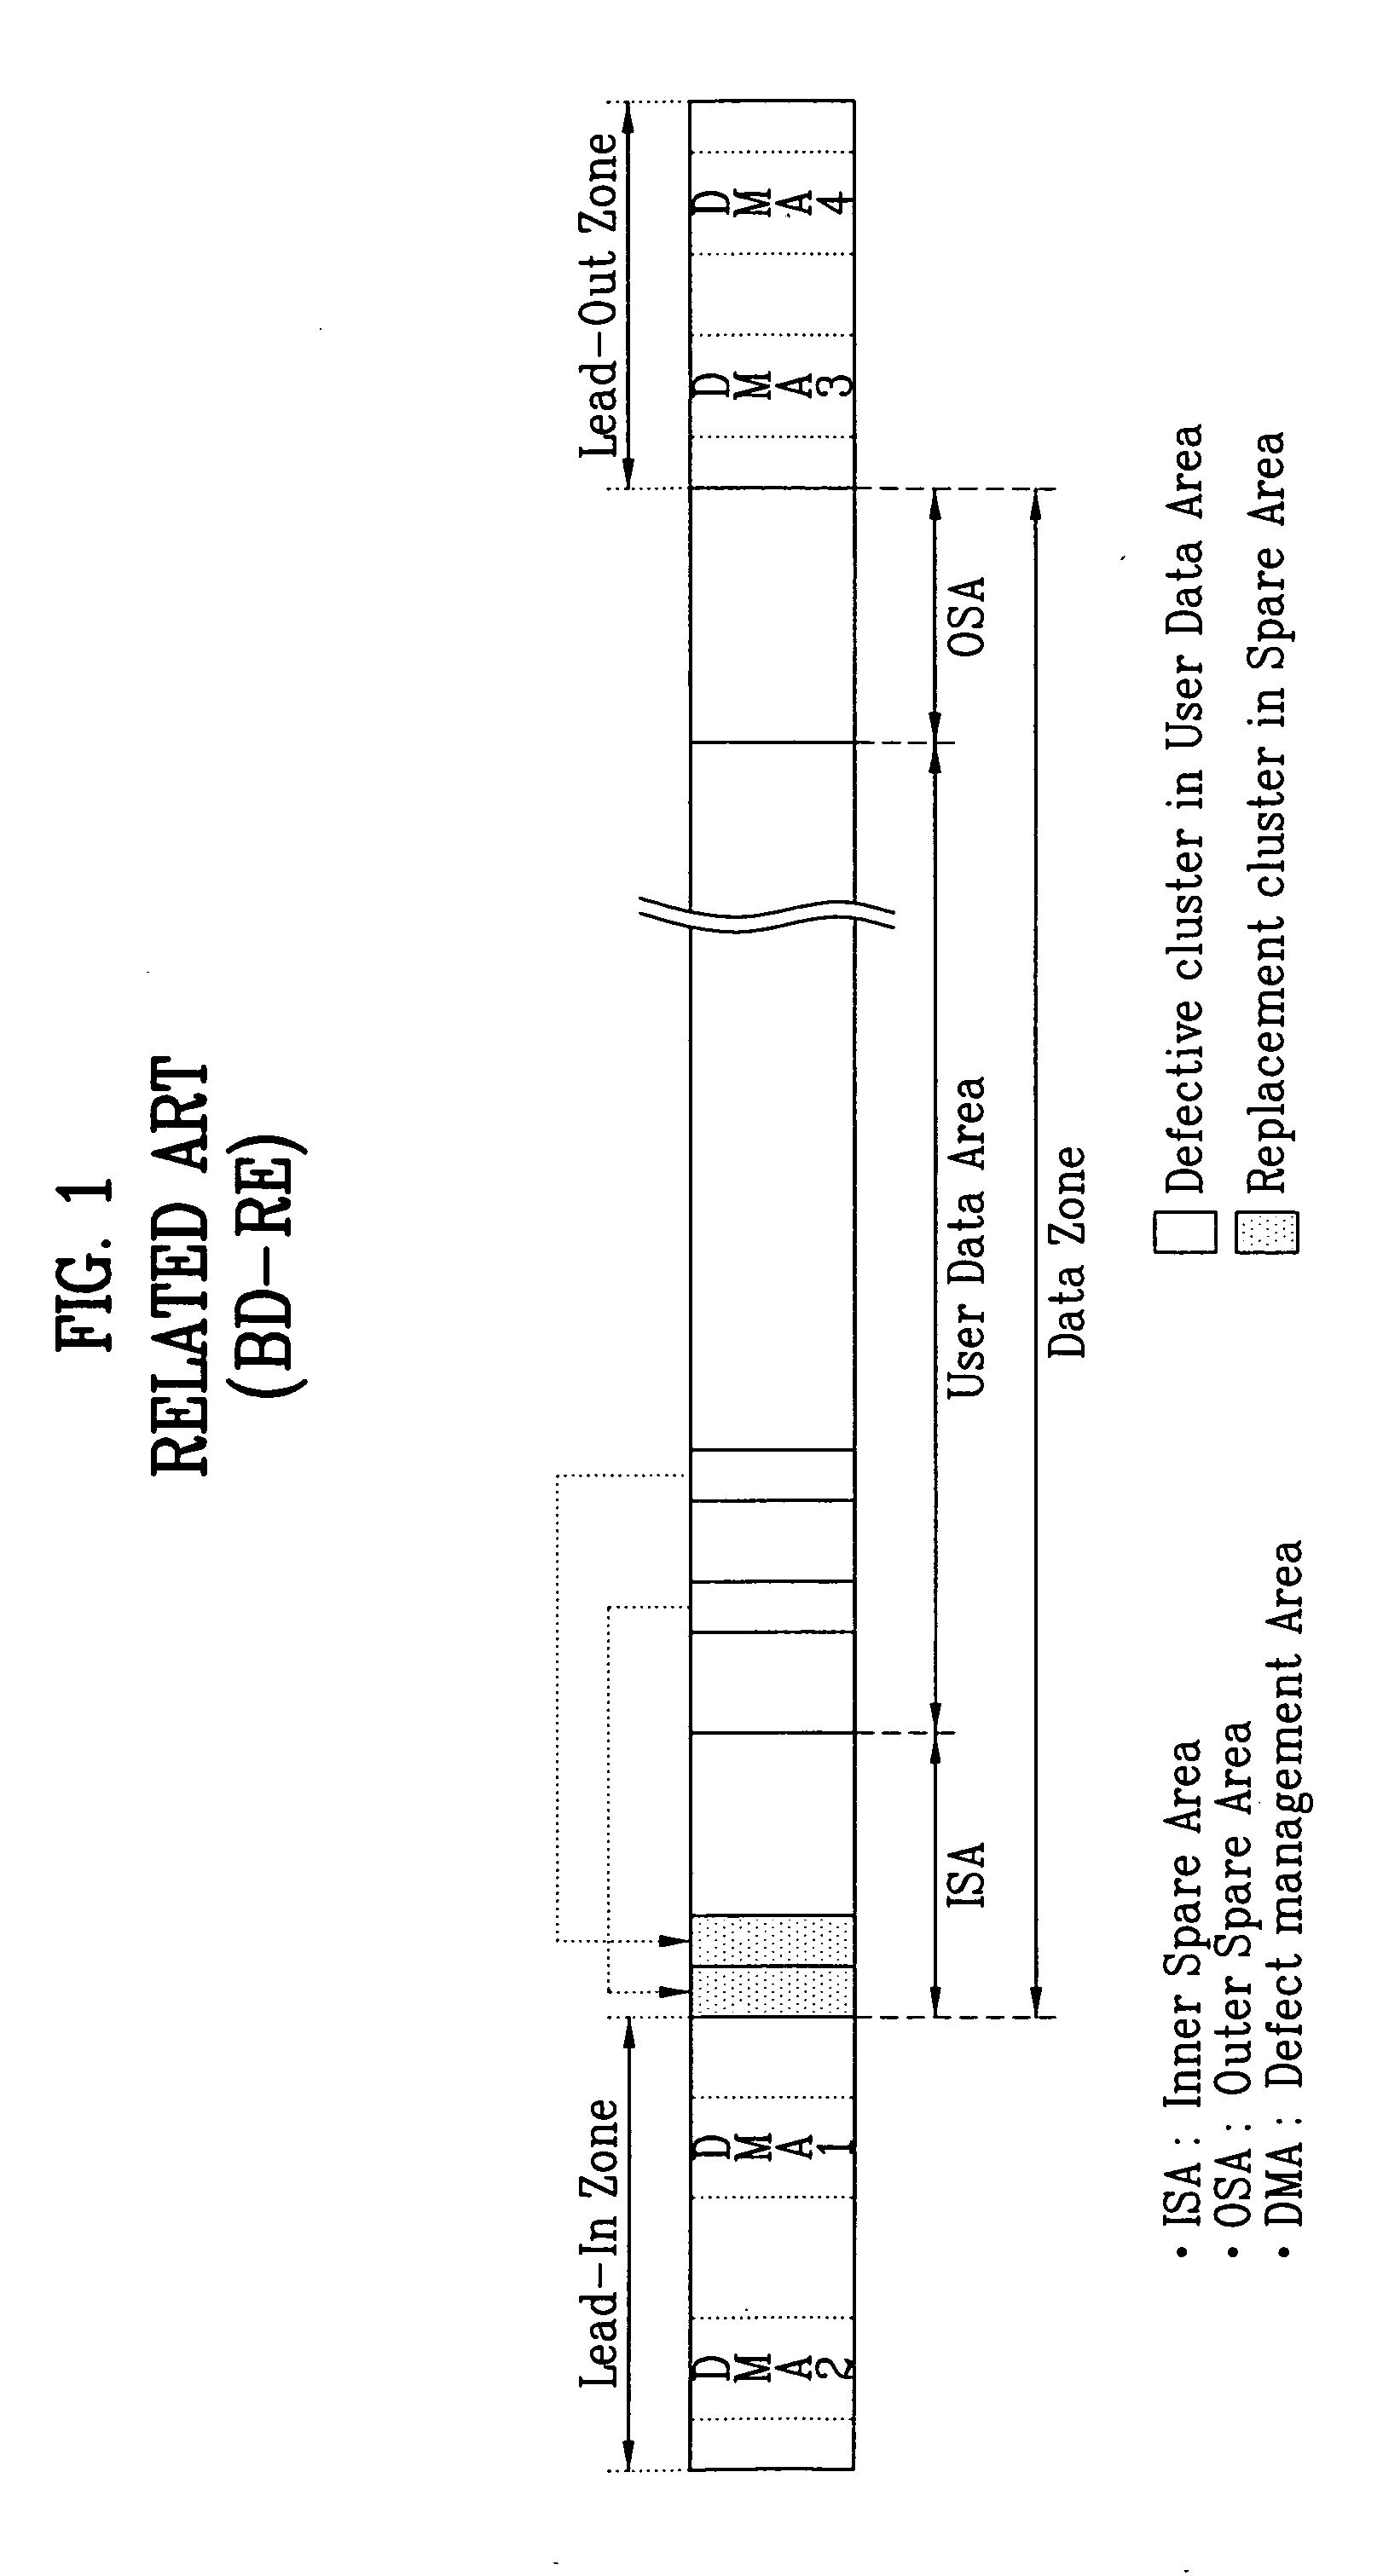 Write-once optical disc, and method and apparatus for recording/reproducing management information on/from optical disc